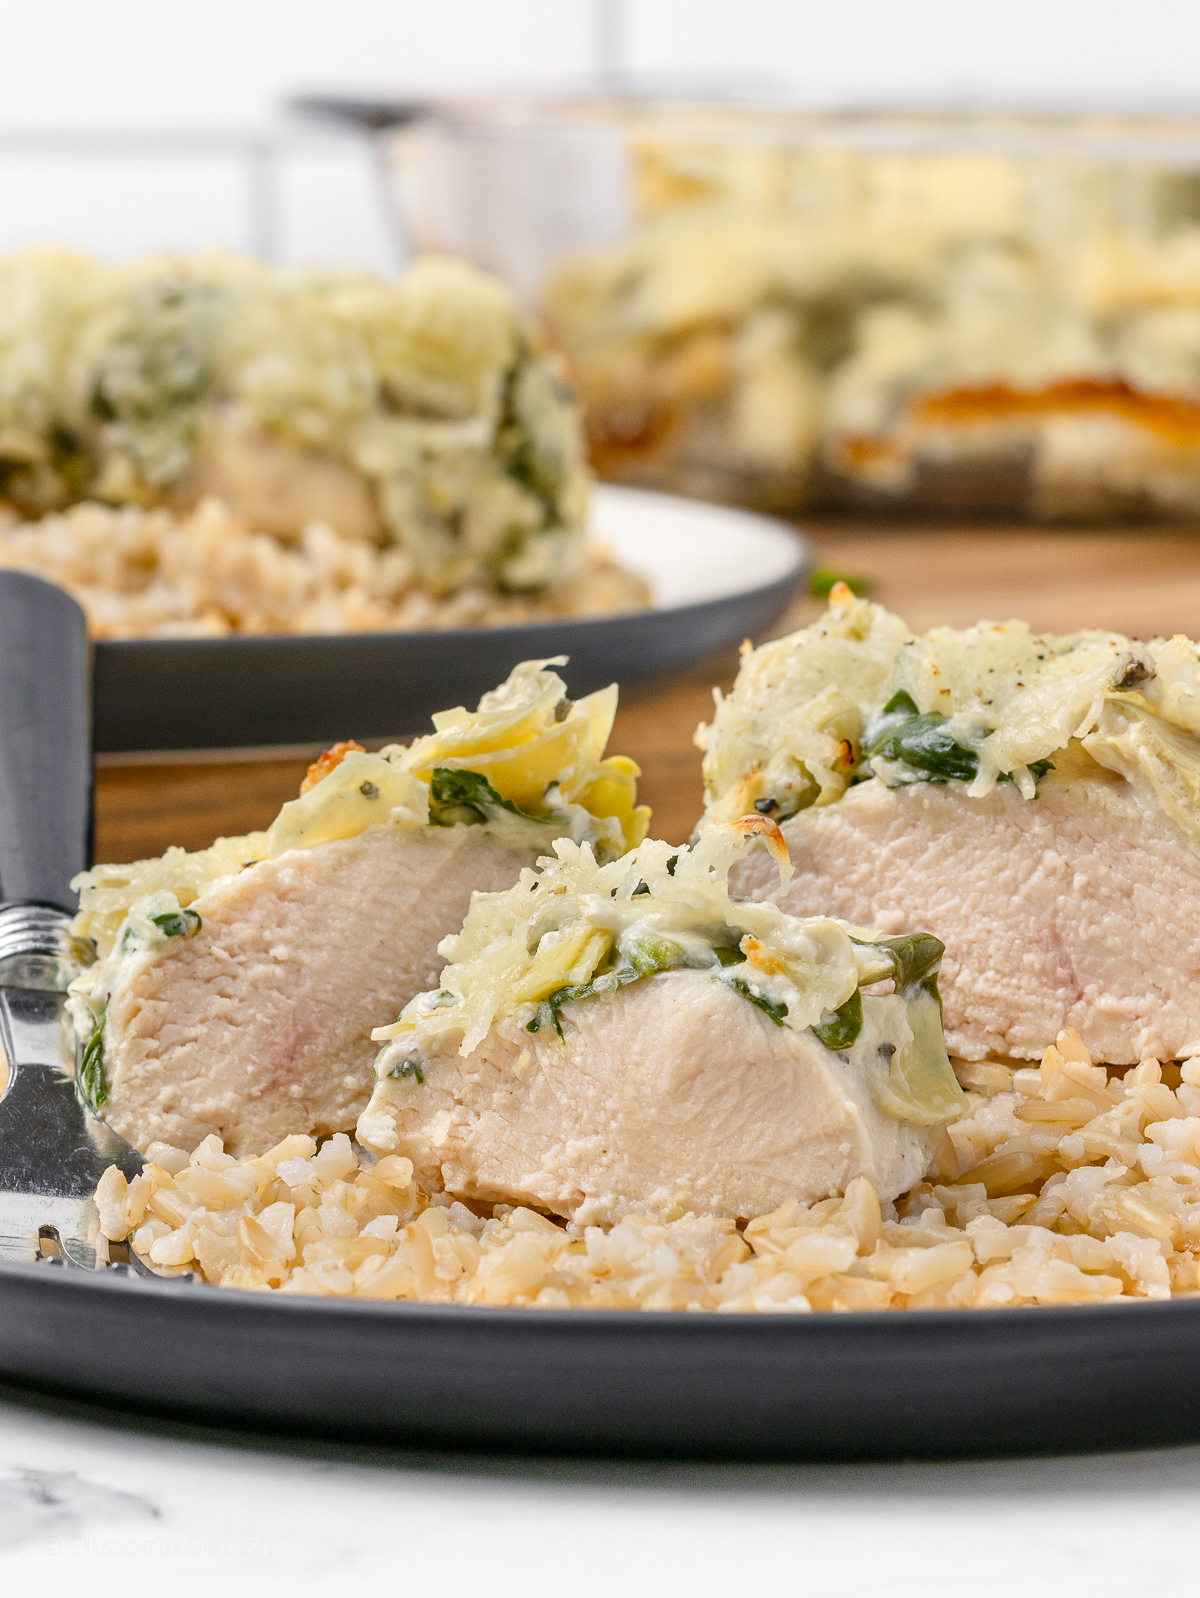 A plate with cut chicken on a bed of brown rice. The chicken is moist and topped with a creamy and cheesy spinach artichoke topping. Large casserole dish of more chicken in the background.